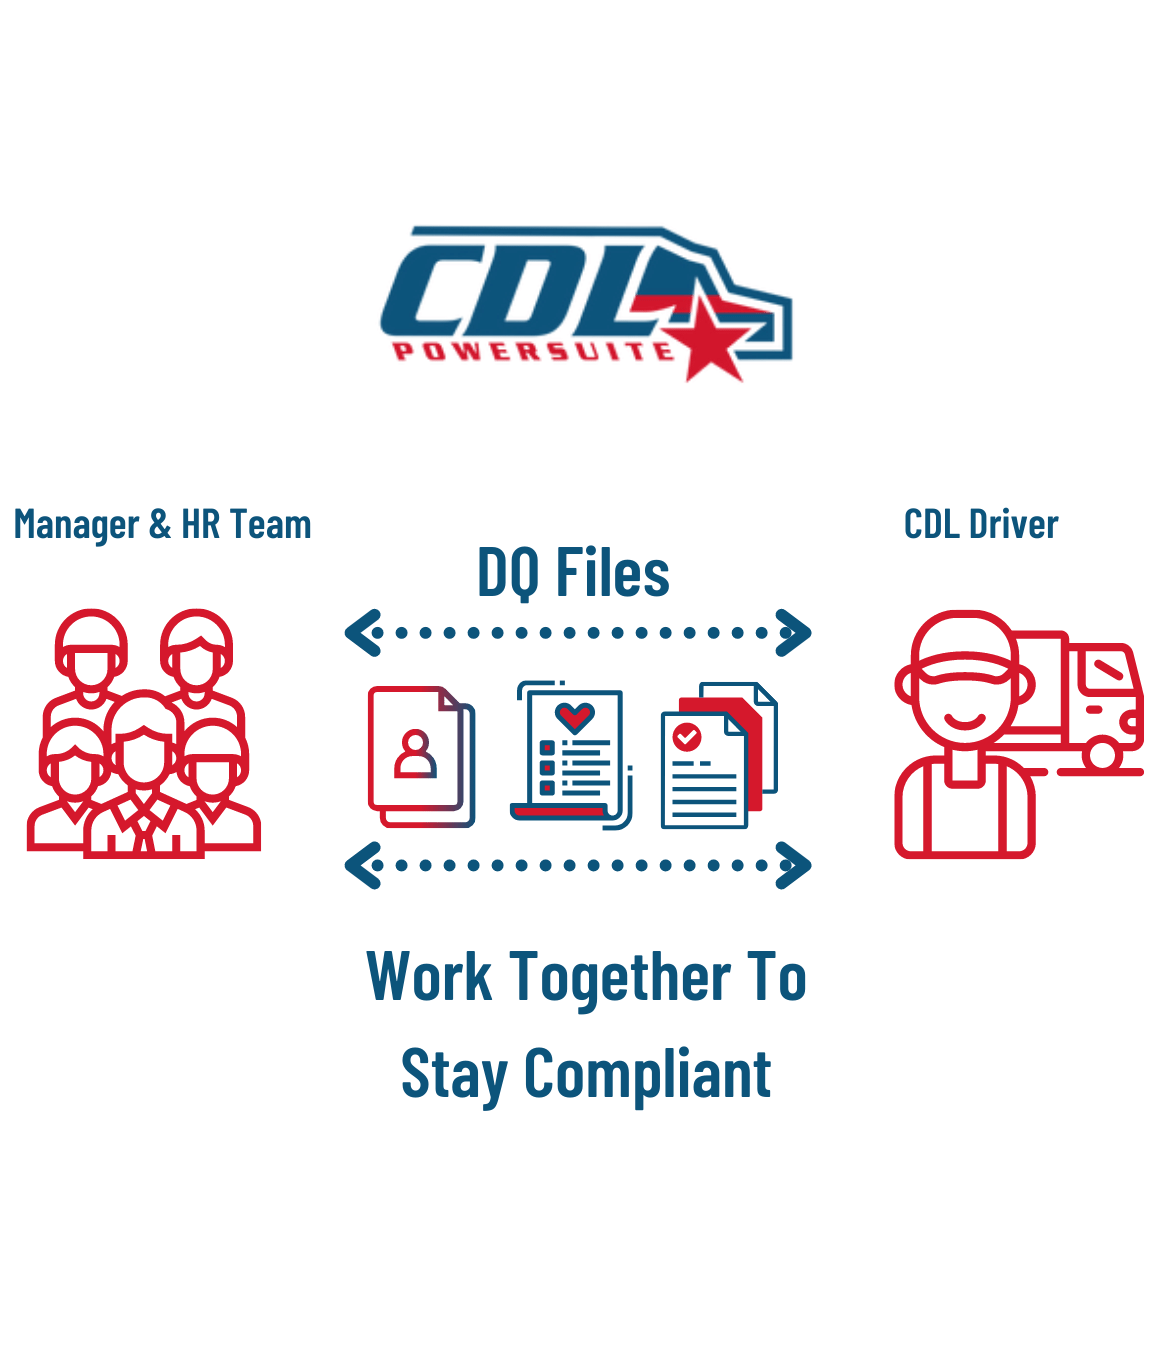 a poster for cdl powersuite showing how to work together to stay compliant